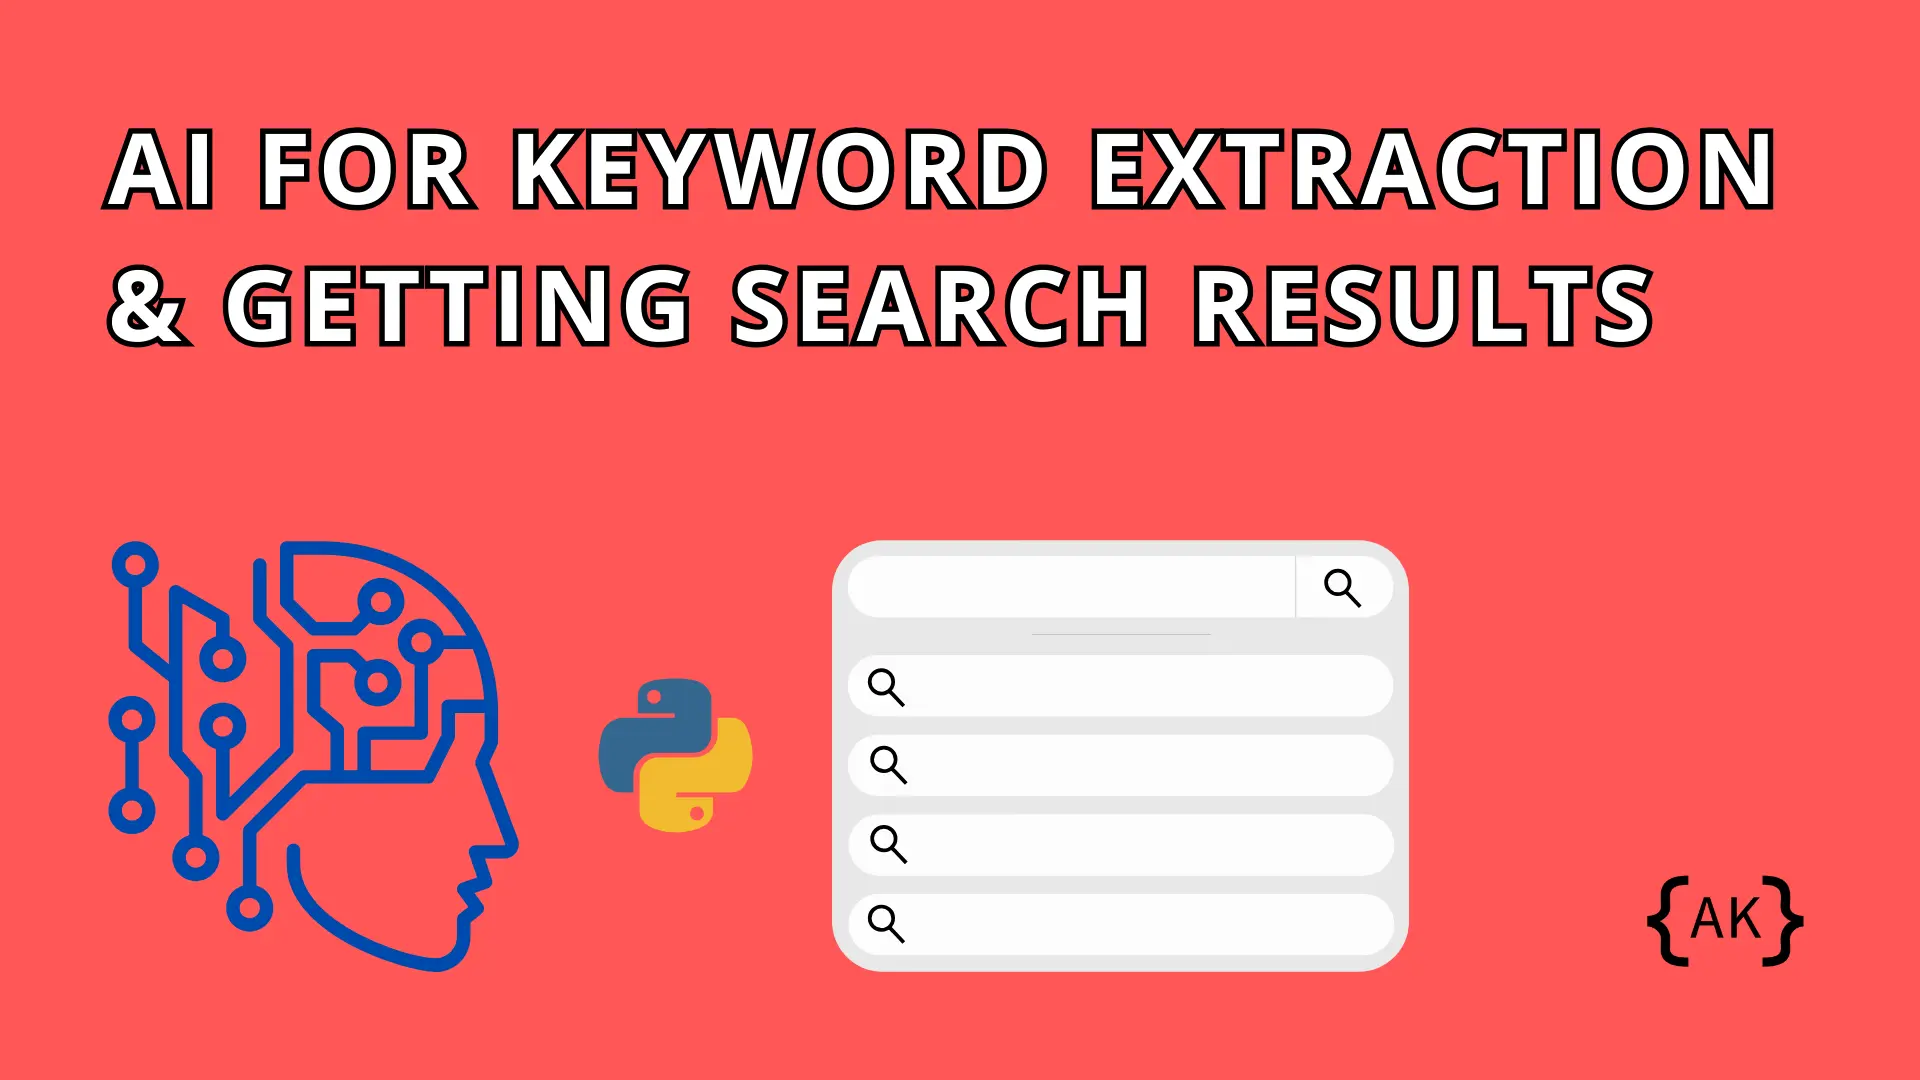 USING AI FOR KEYWORD EXTRACTION